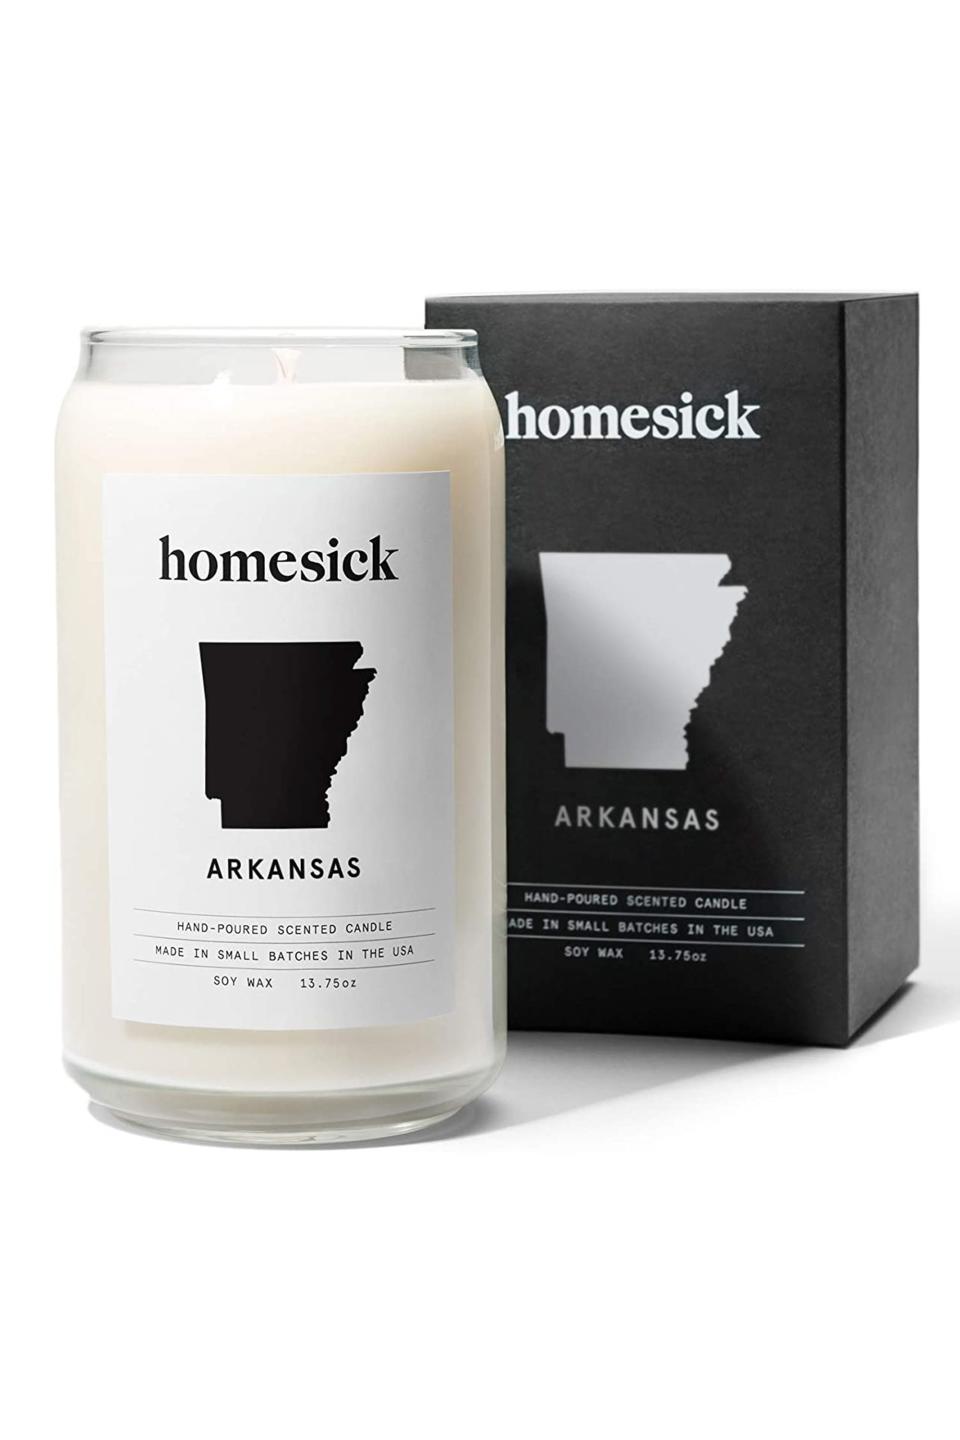 Homesick Candle Scented, Arkansas